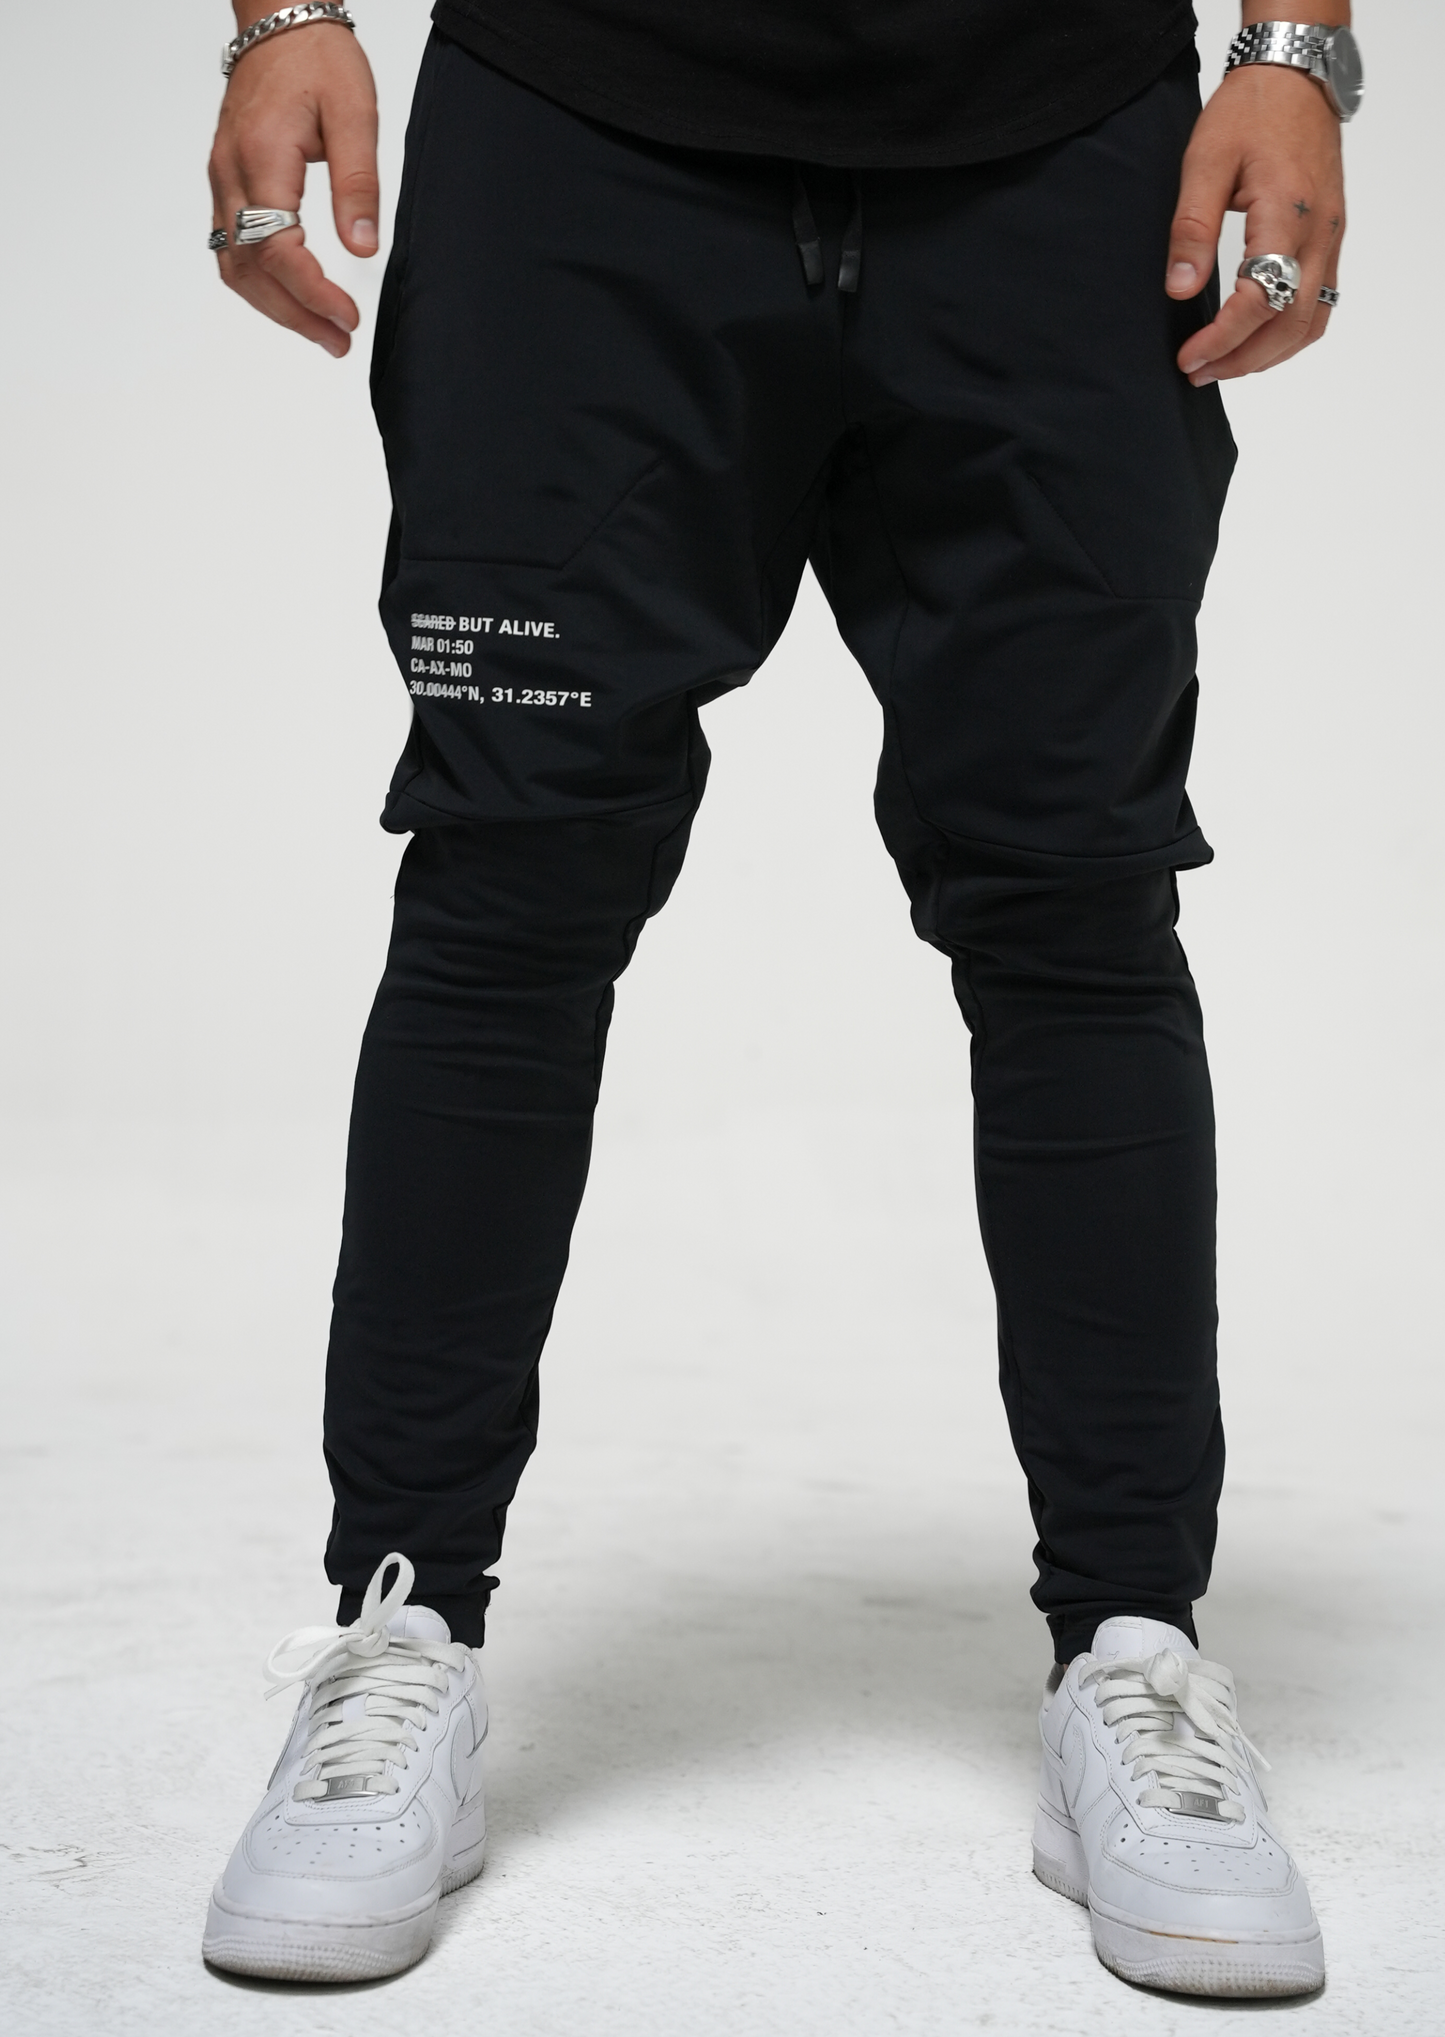 Tokyo Joggers -front view worn by model with white sneaker